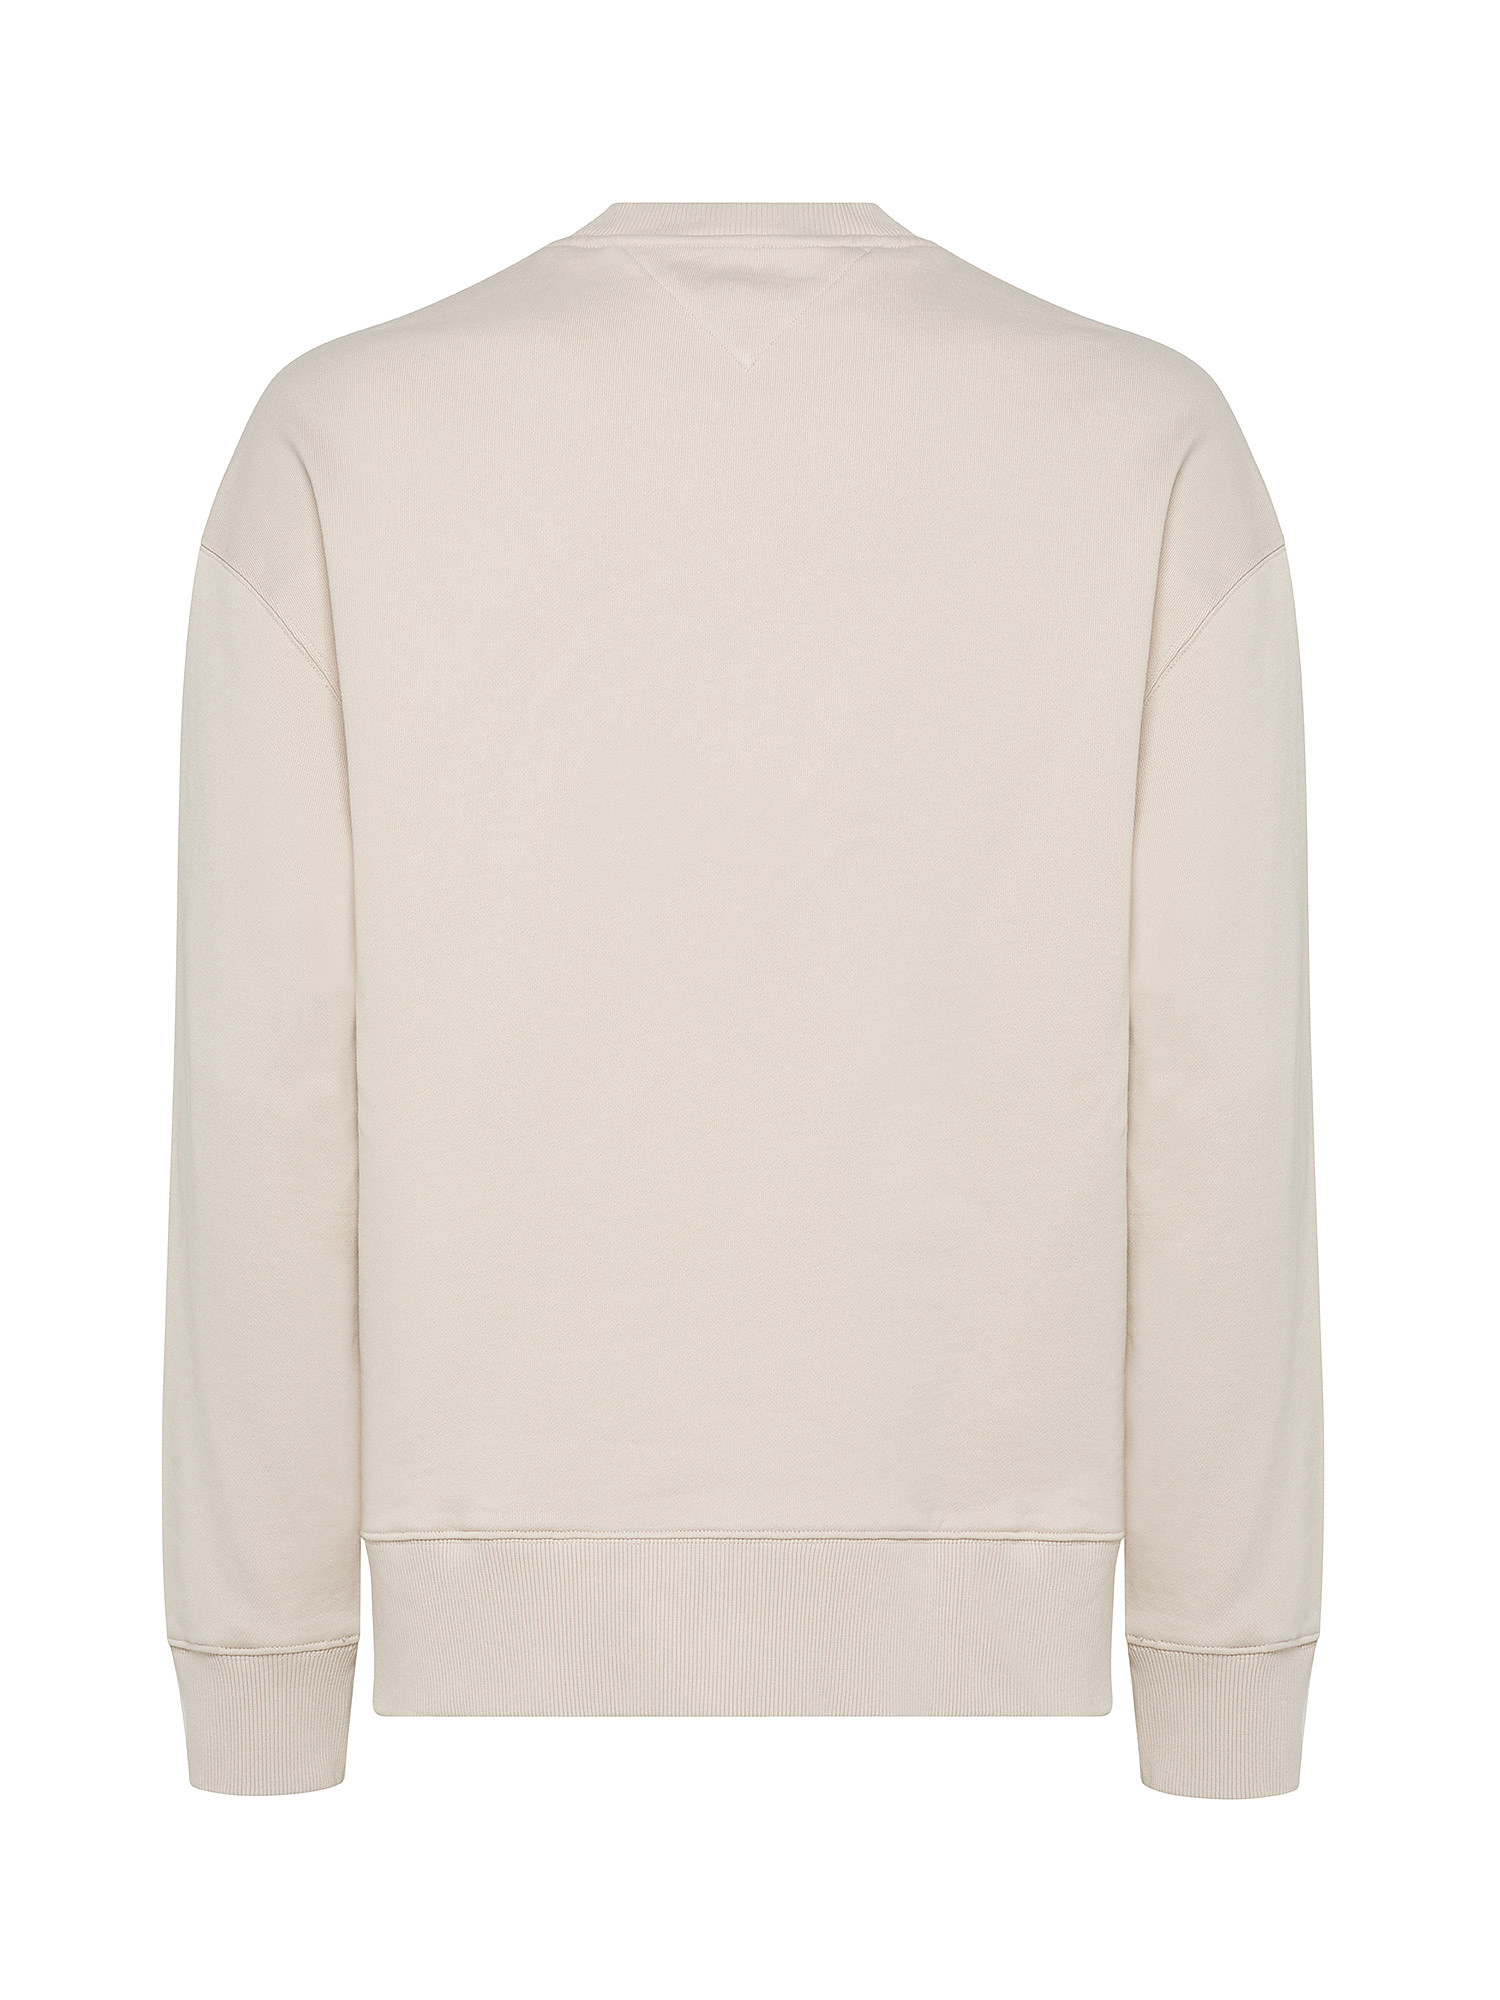 Tommy Jeans - Relaxed fit sweatshirt in cotton with logo, White Ivory, large image number 1